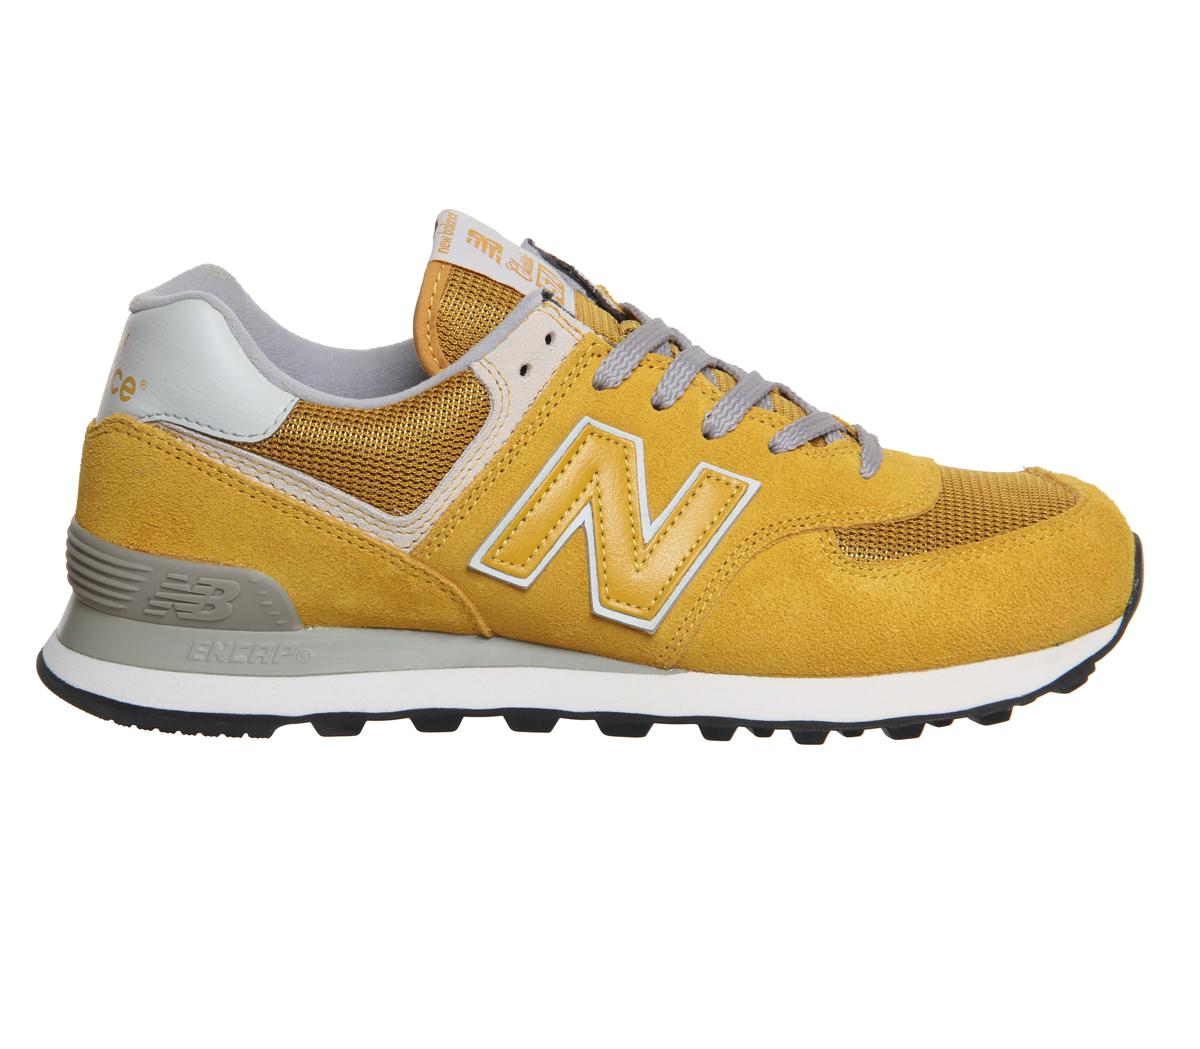 Lyst - New Balance M574 in Yellow for Men